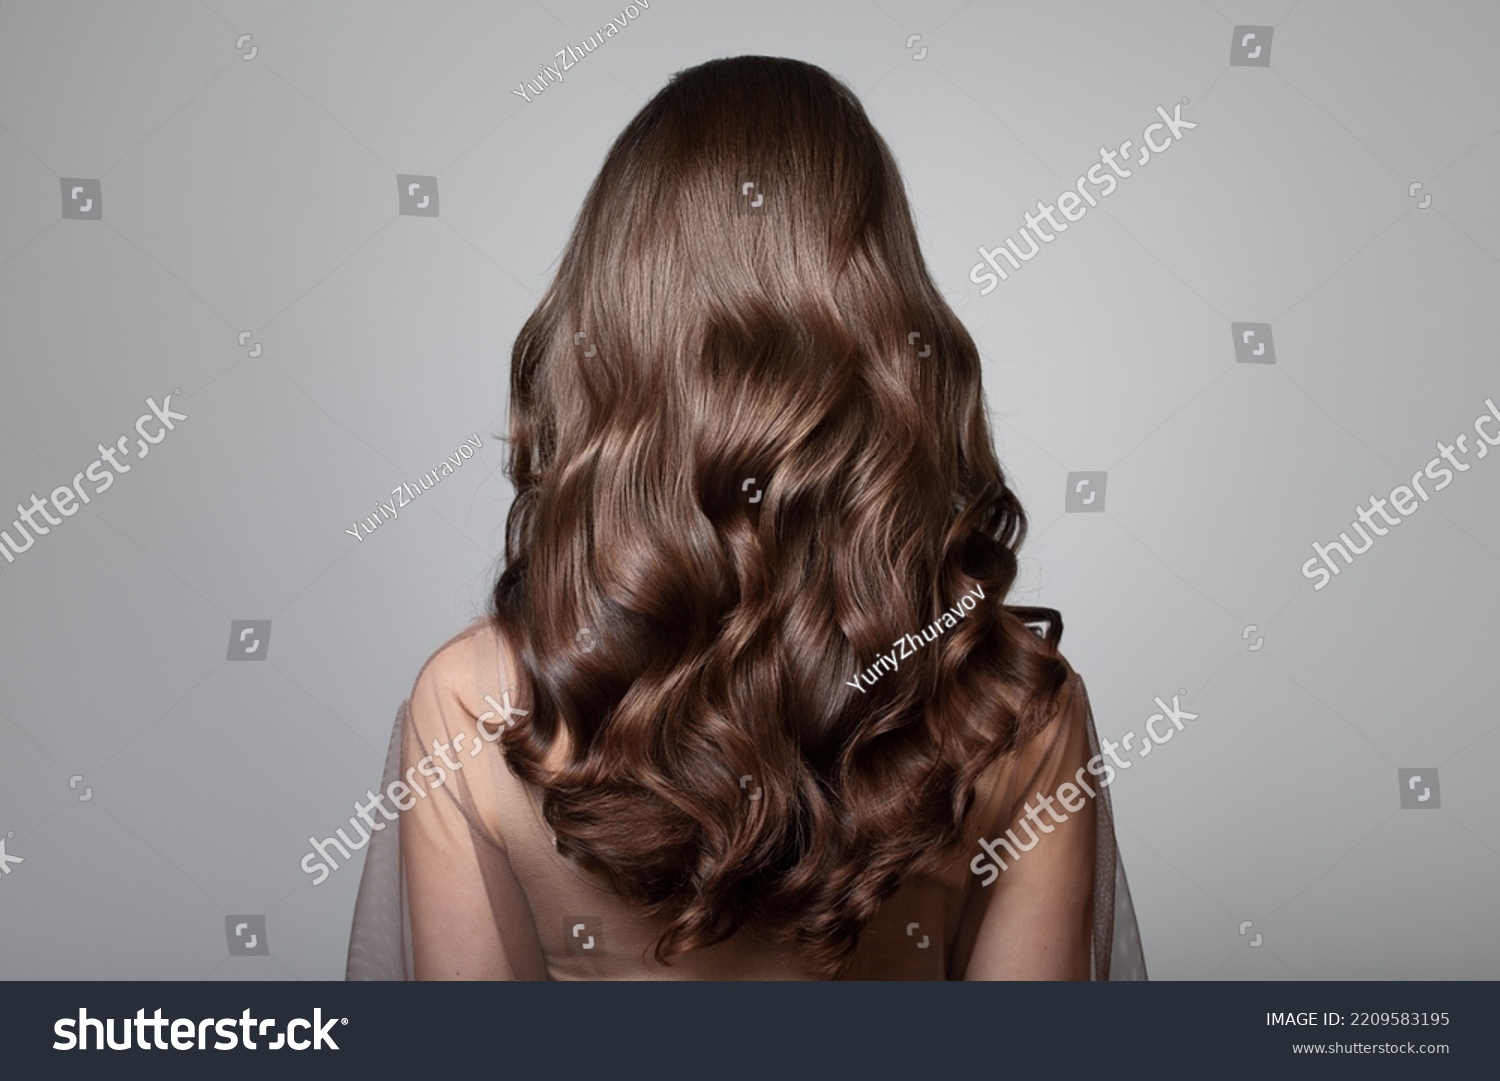 Portrait of a beautiful girl with luxurious curly long hair. Back view. #2209583195